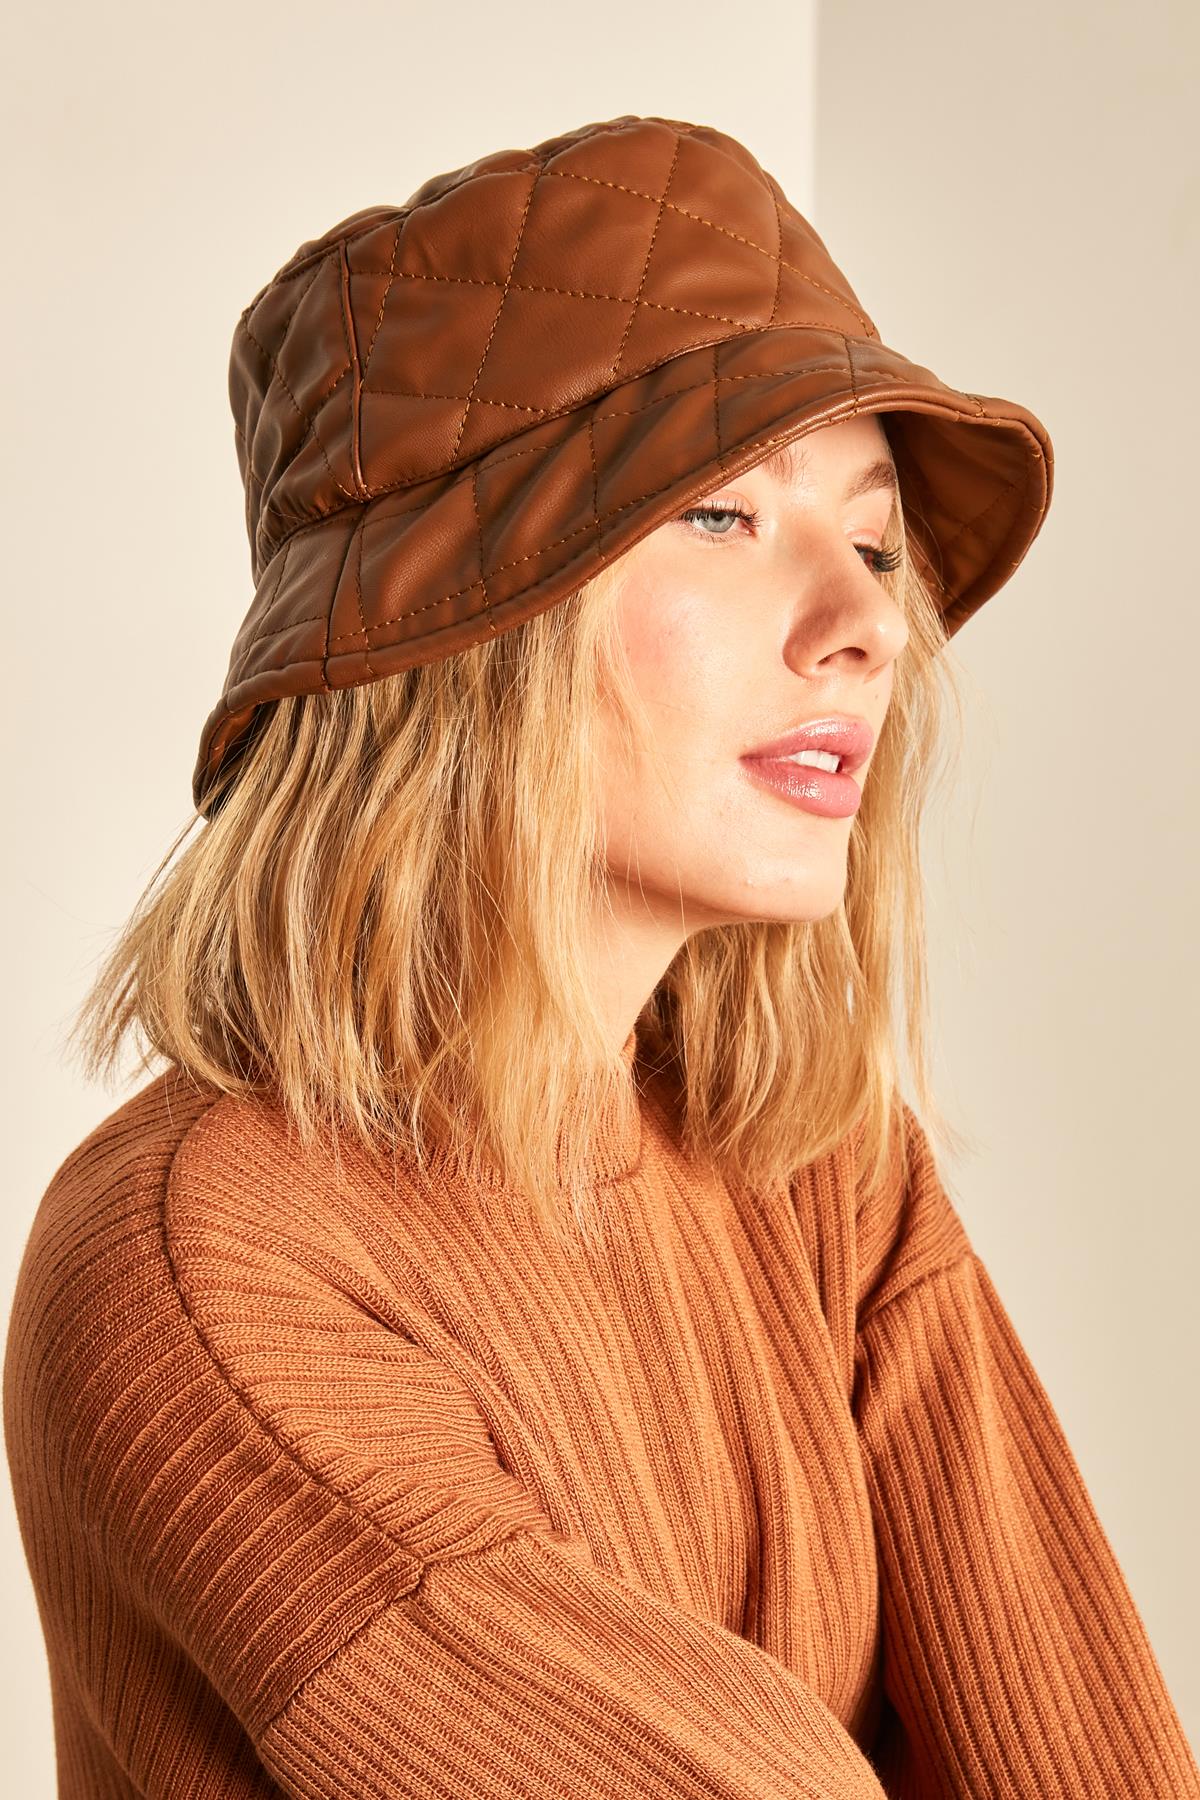 A model wears NSV11178 - Quilted Bucket Hat - Tan, wholesale Hat of Nesvay to display at Lonca